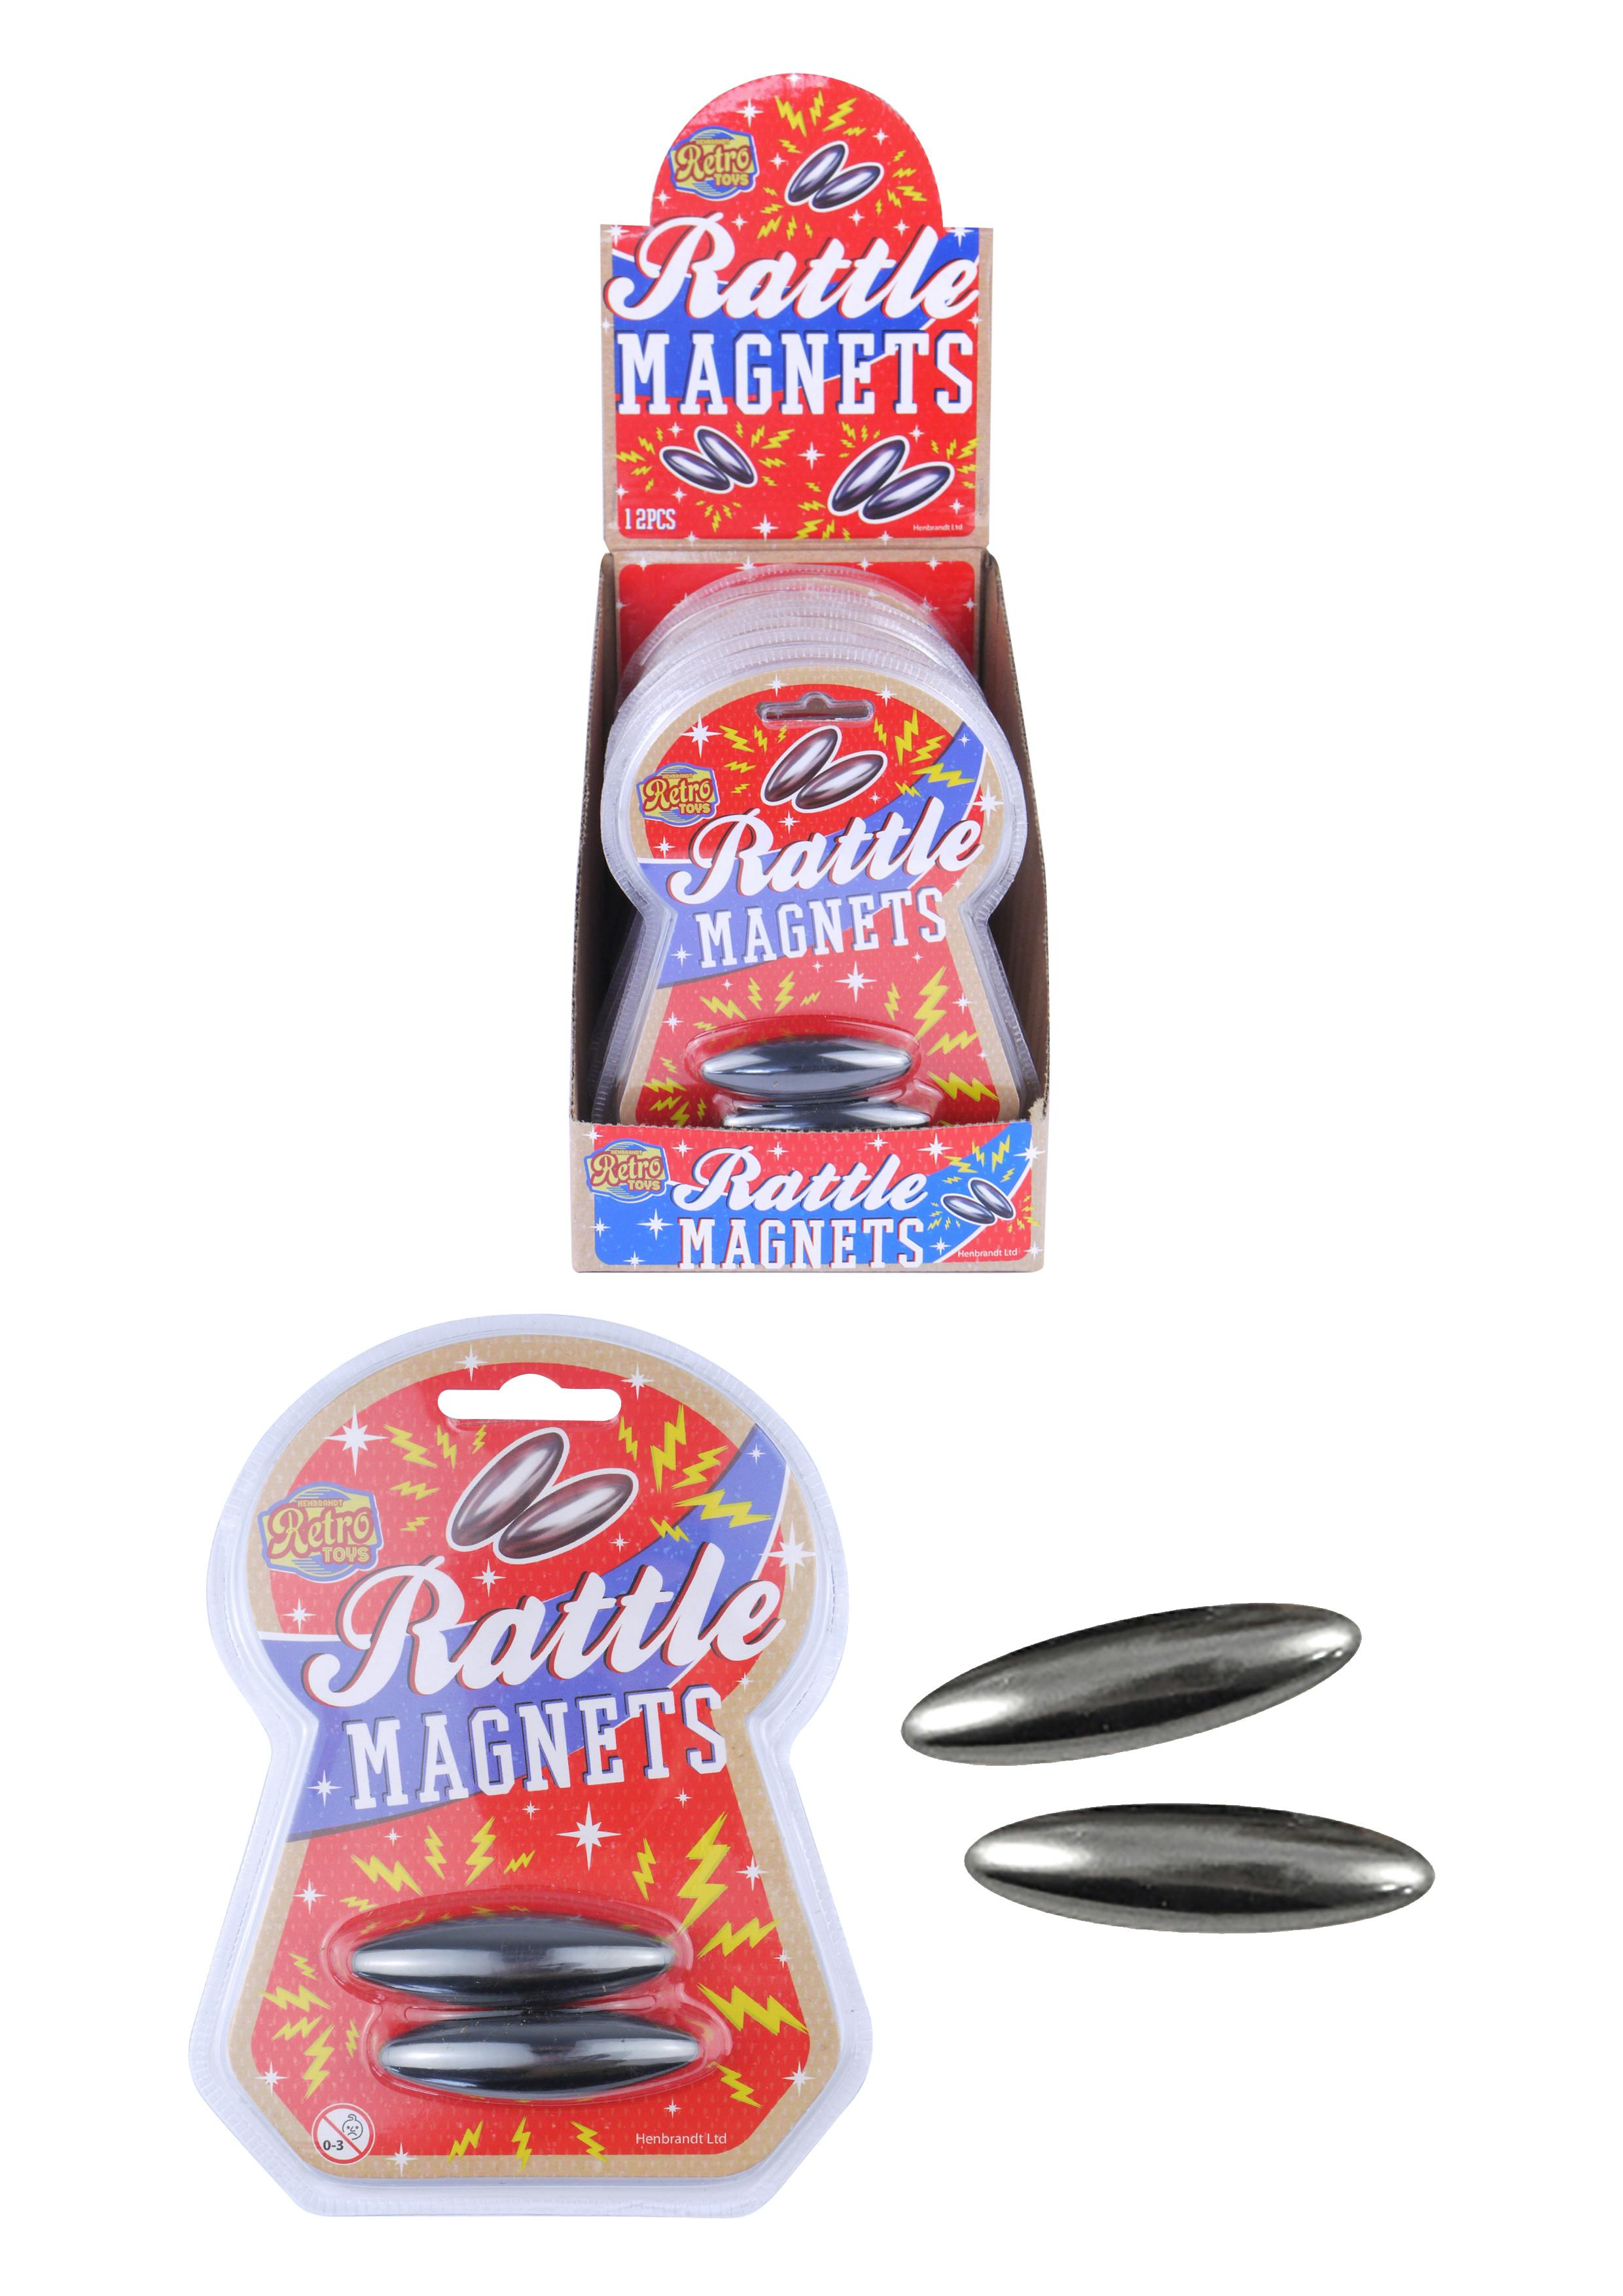 Product - Rattle magnets